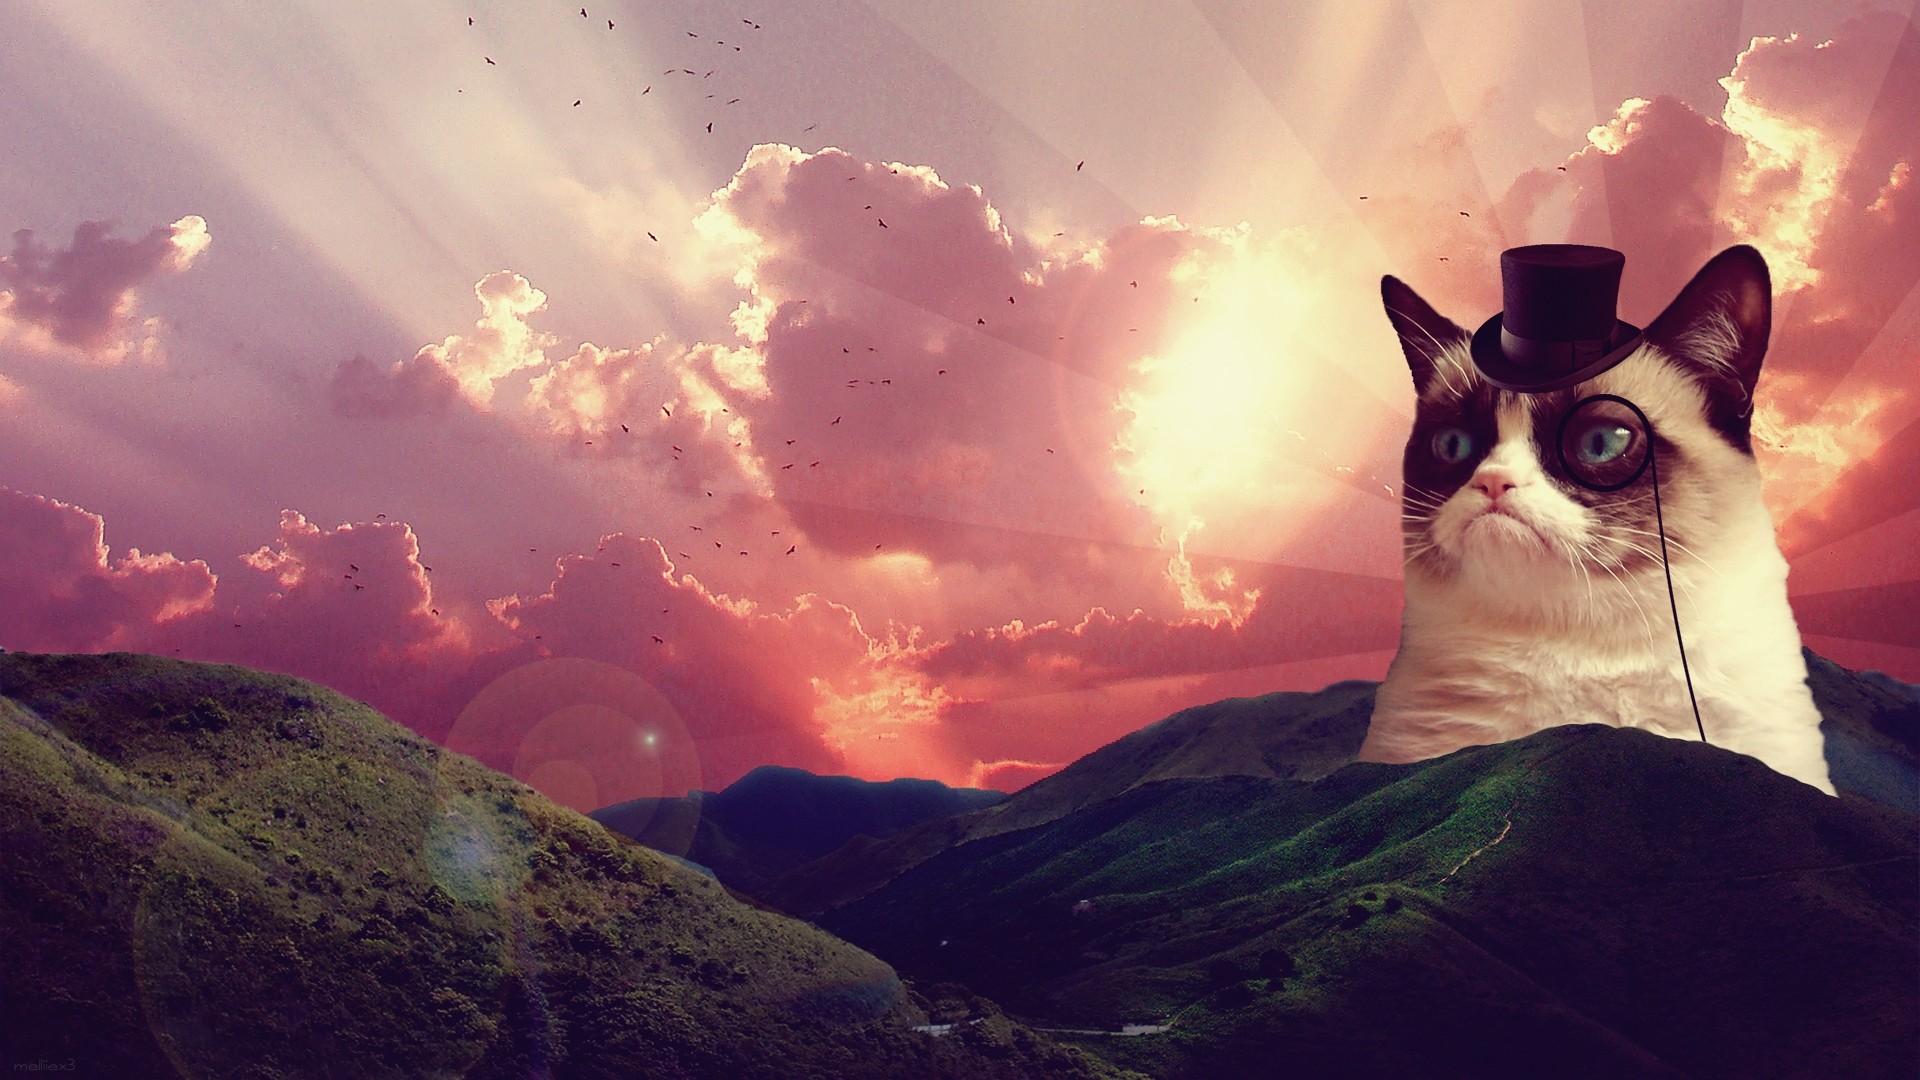 1920x1080 HD Grumpy Cat Wallpaper For Background, Sherice Maclean 17